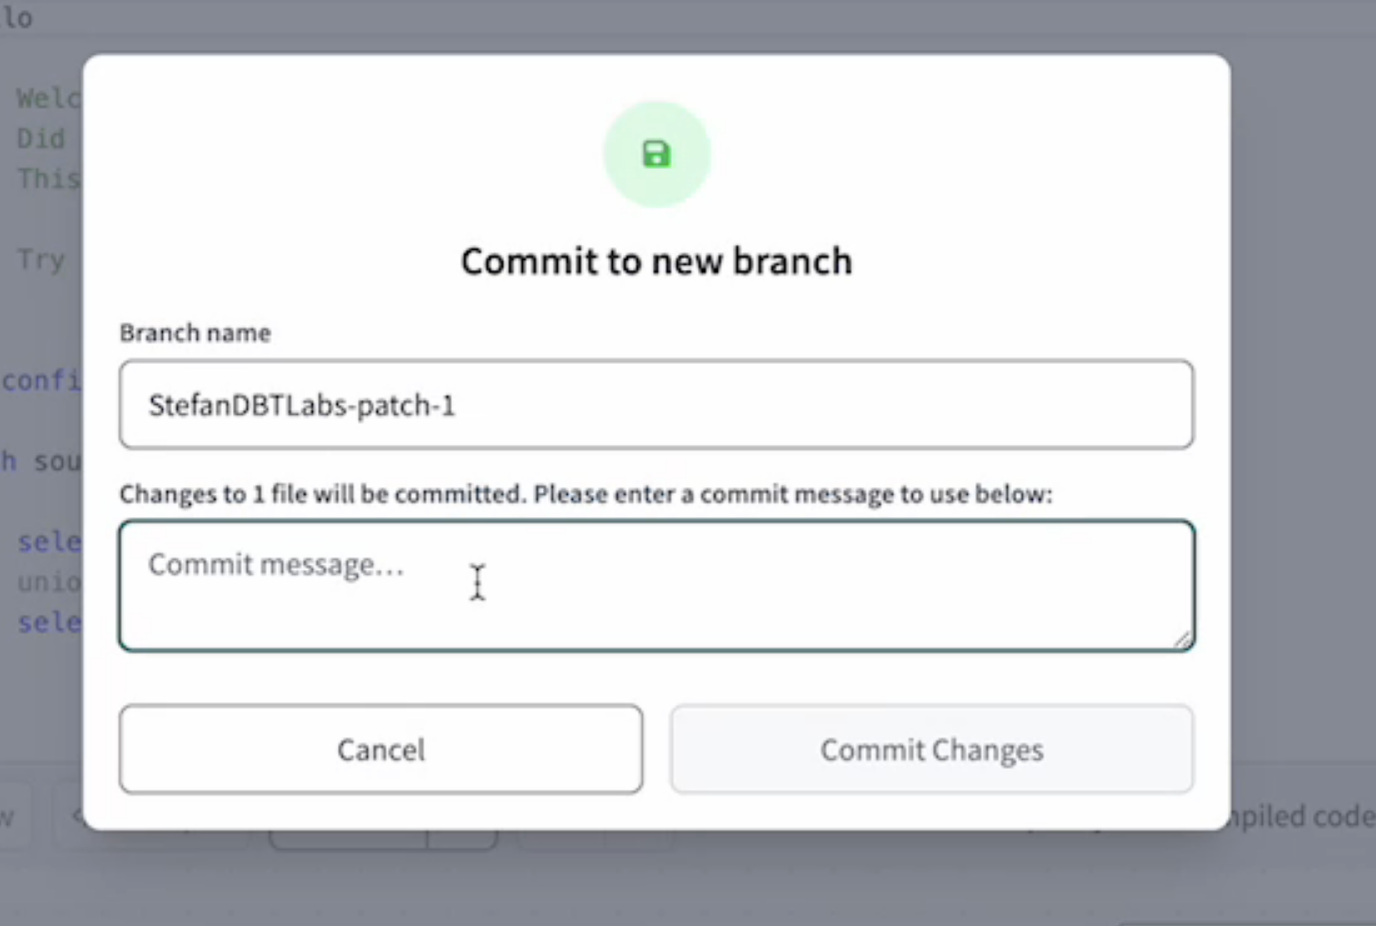 Commit changes to a new branch